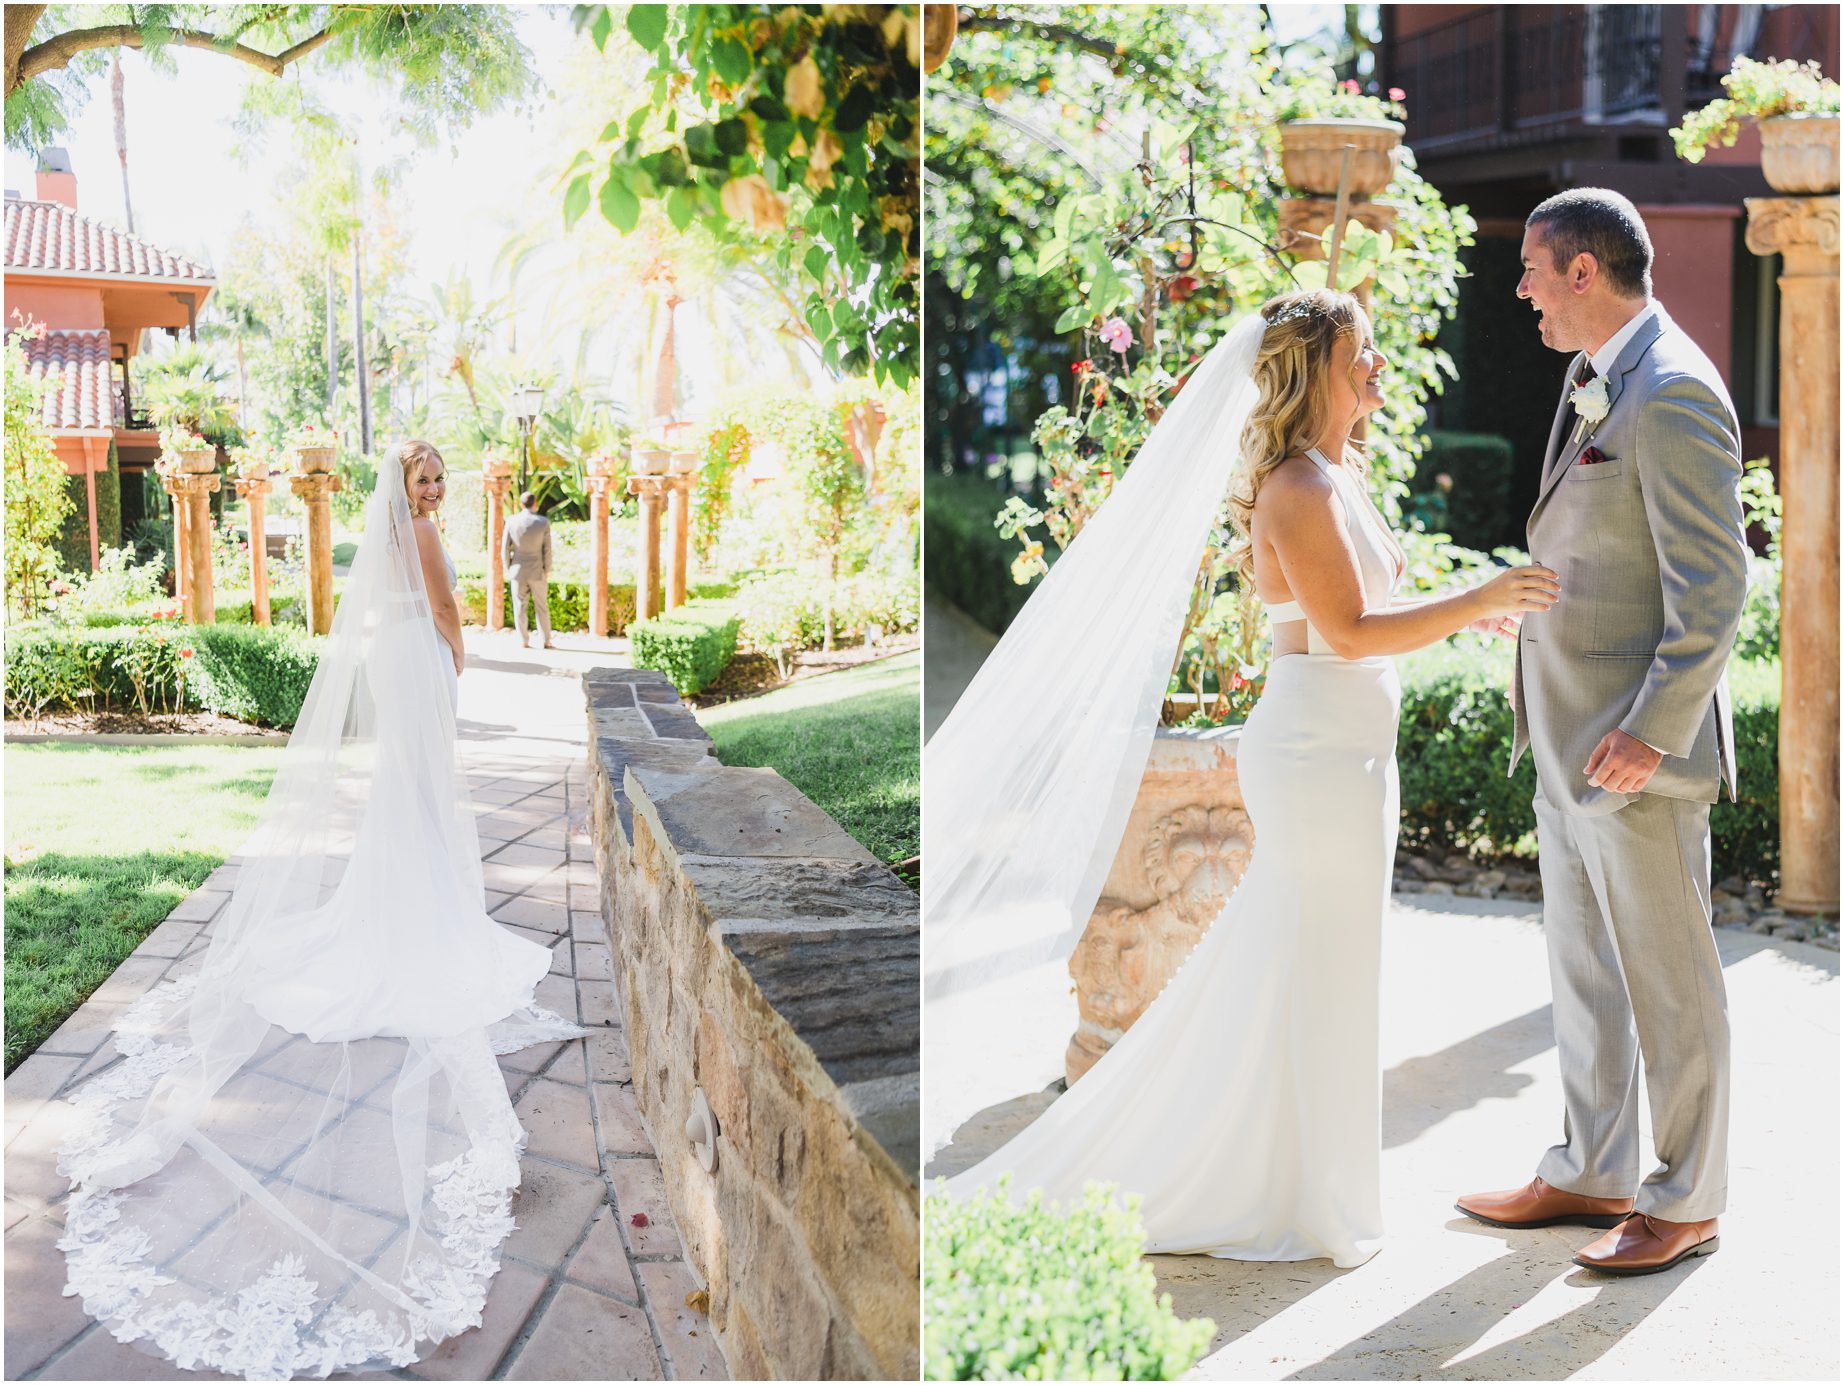 A bride and groom share a first look at Westlake village in before their wedding